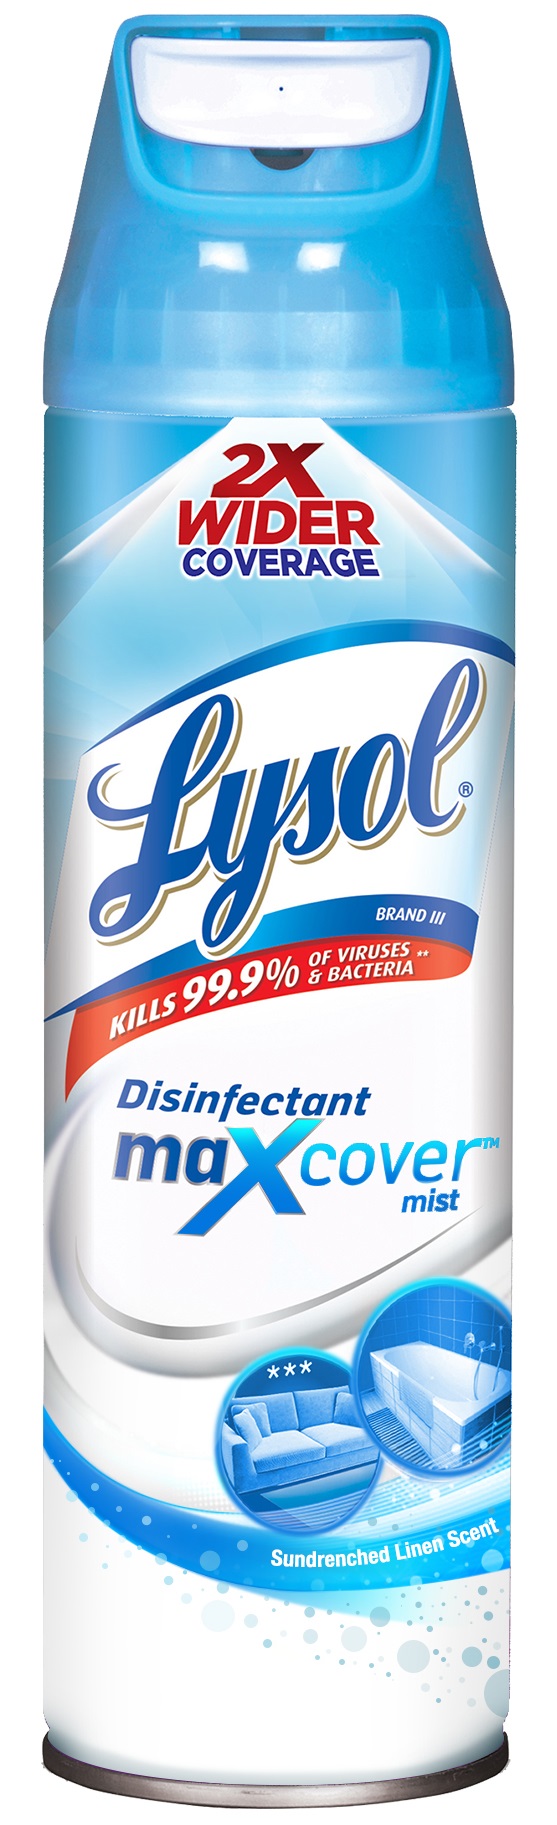 LYSOL® Disinfectant Max Cover Mist - Sundrenched Linen